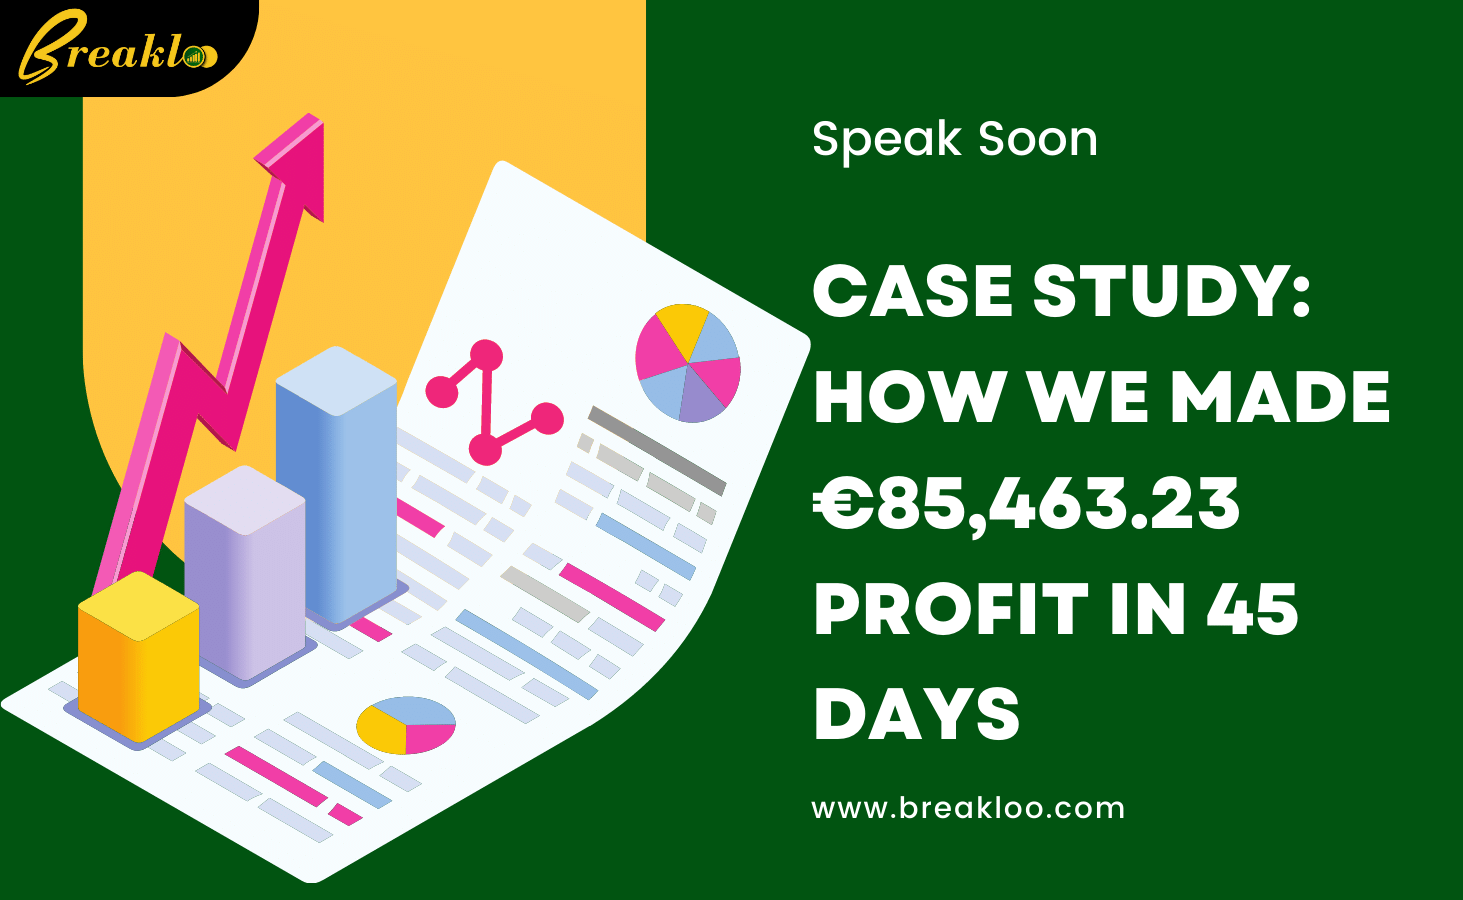 Case Study: How we made €85,463.23 Profit in 45 Days